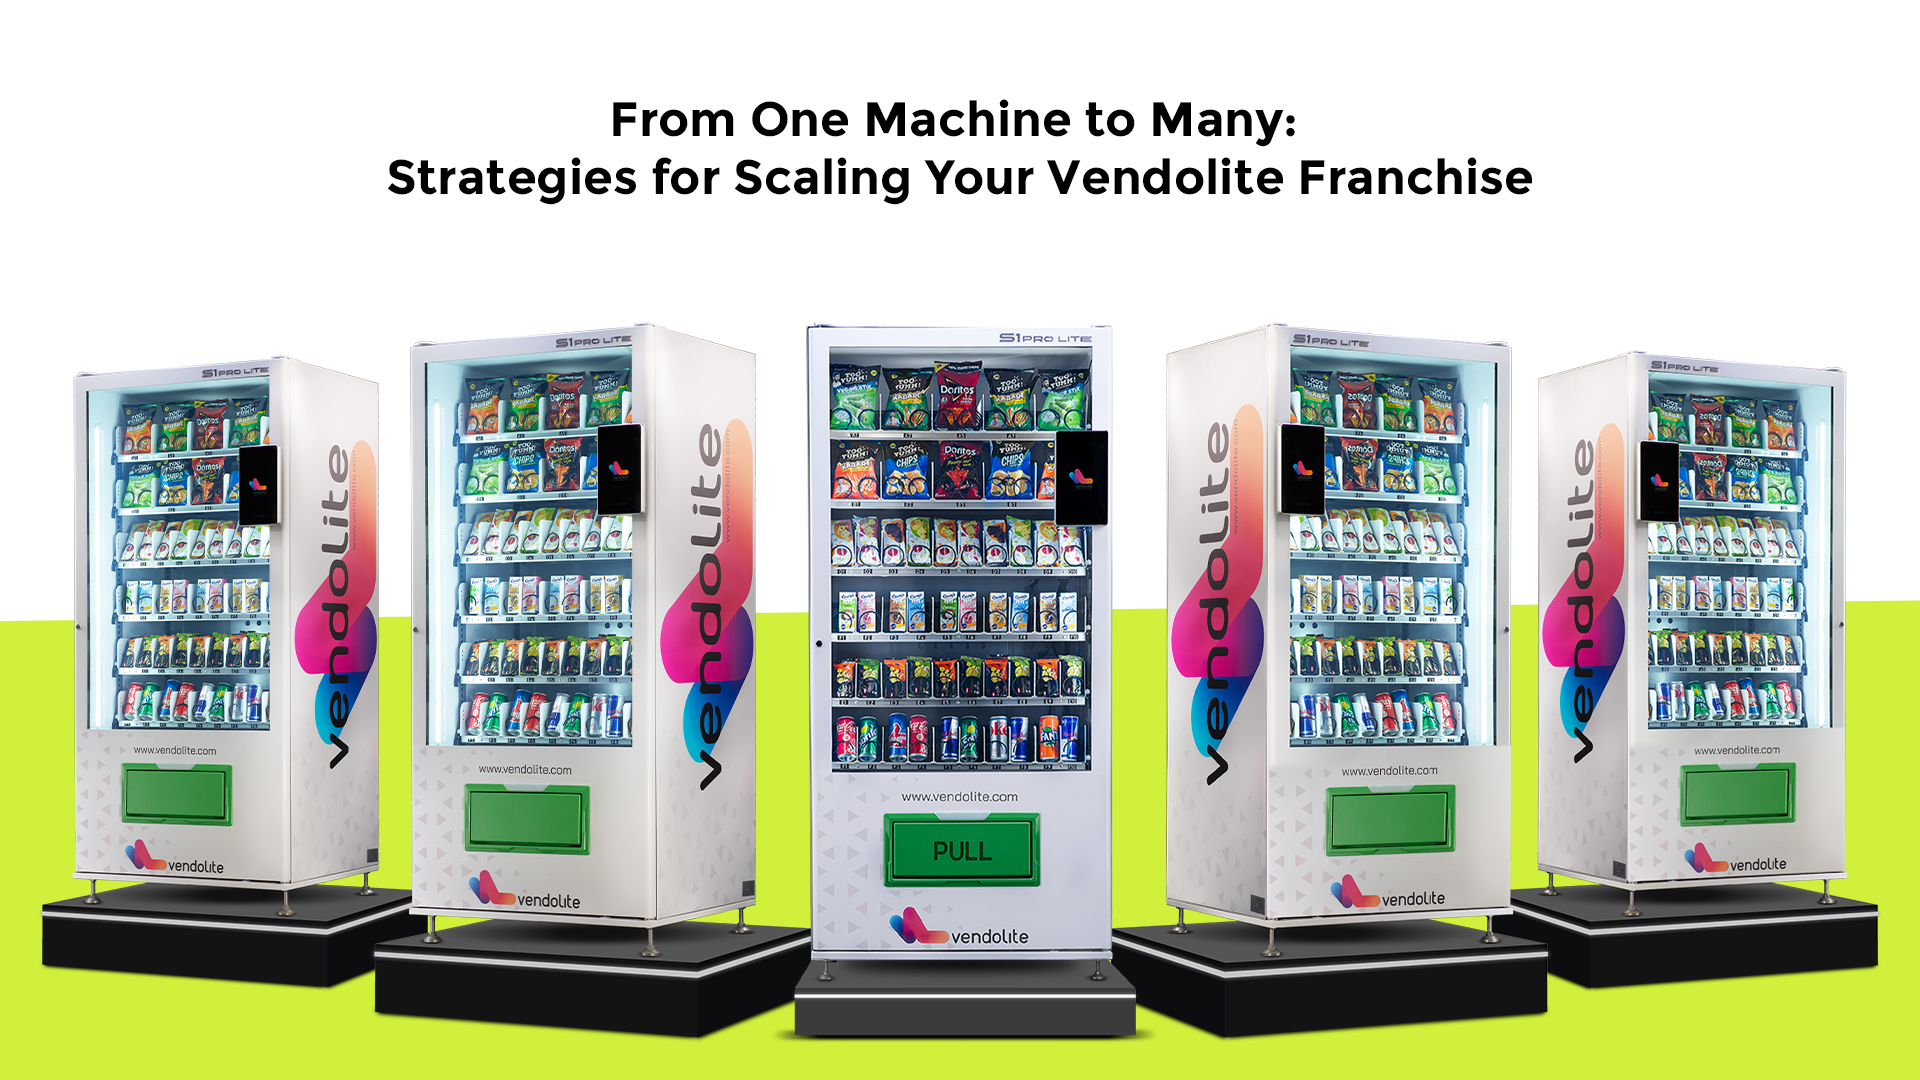 From One Machine to Many: Strategies for Scaling Your Vendolite Franchise